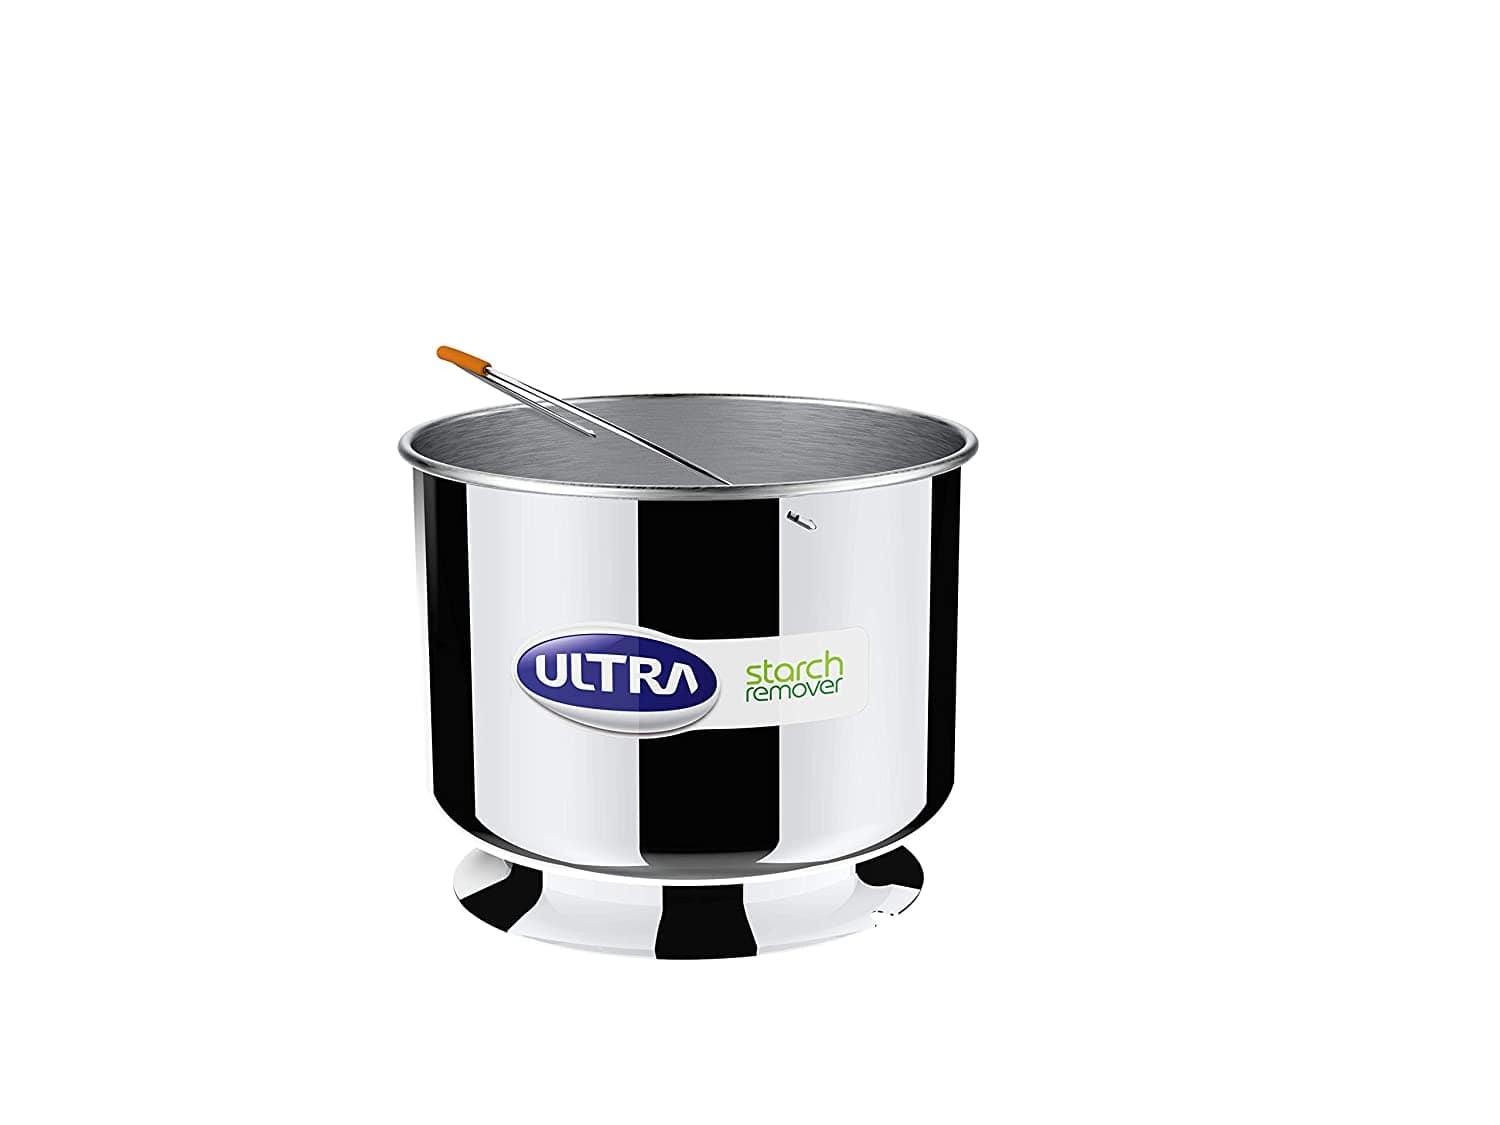 ULTRA Duracook Diet Pressure Cooker with Starch Remover